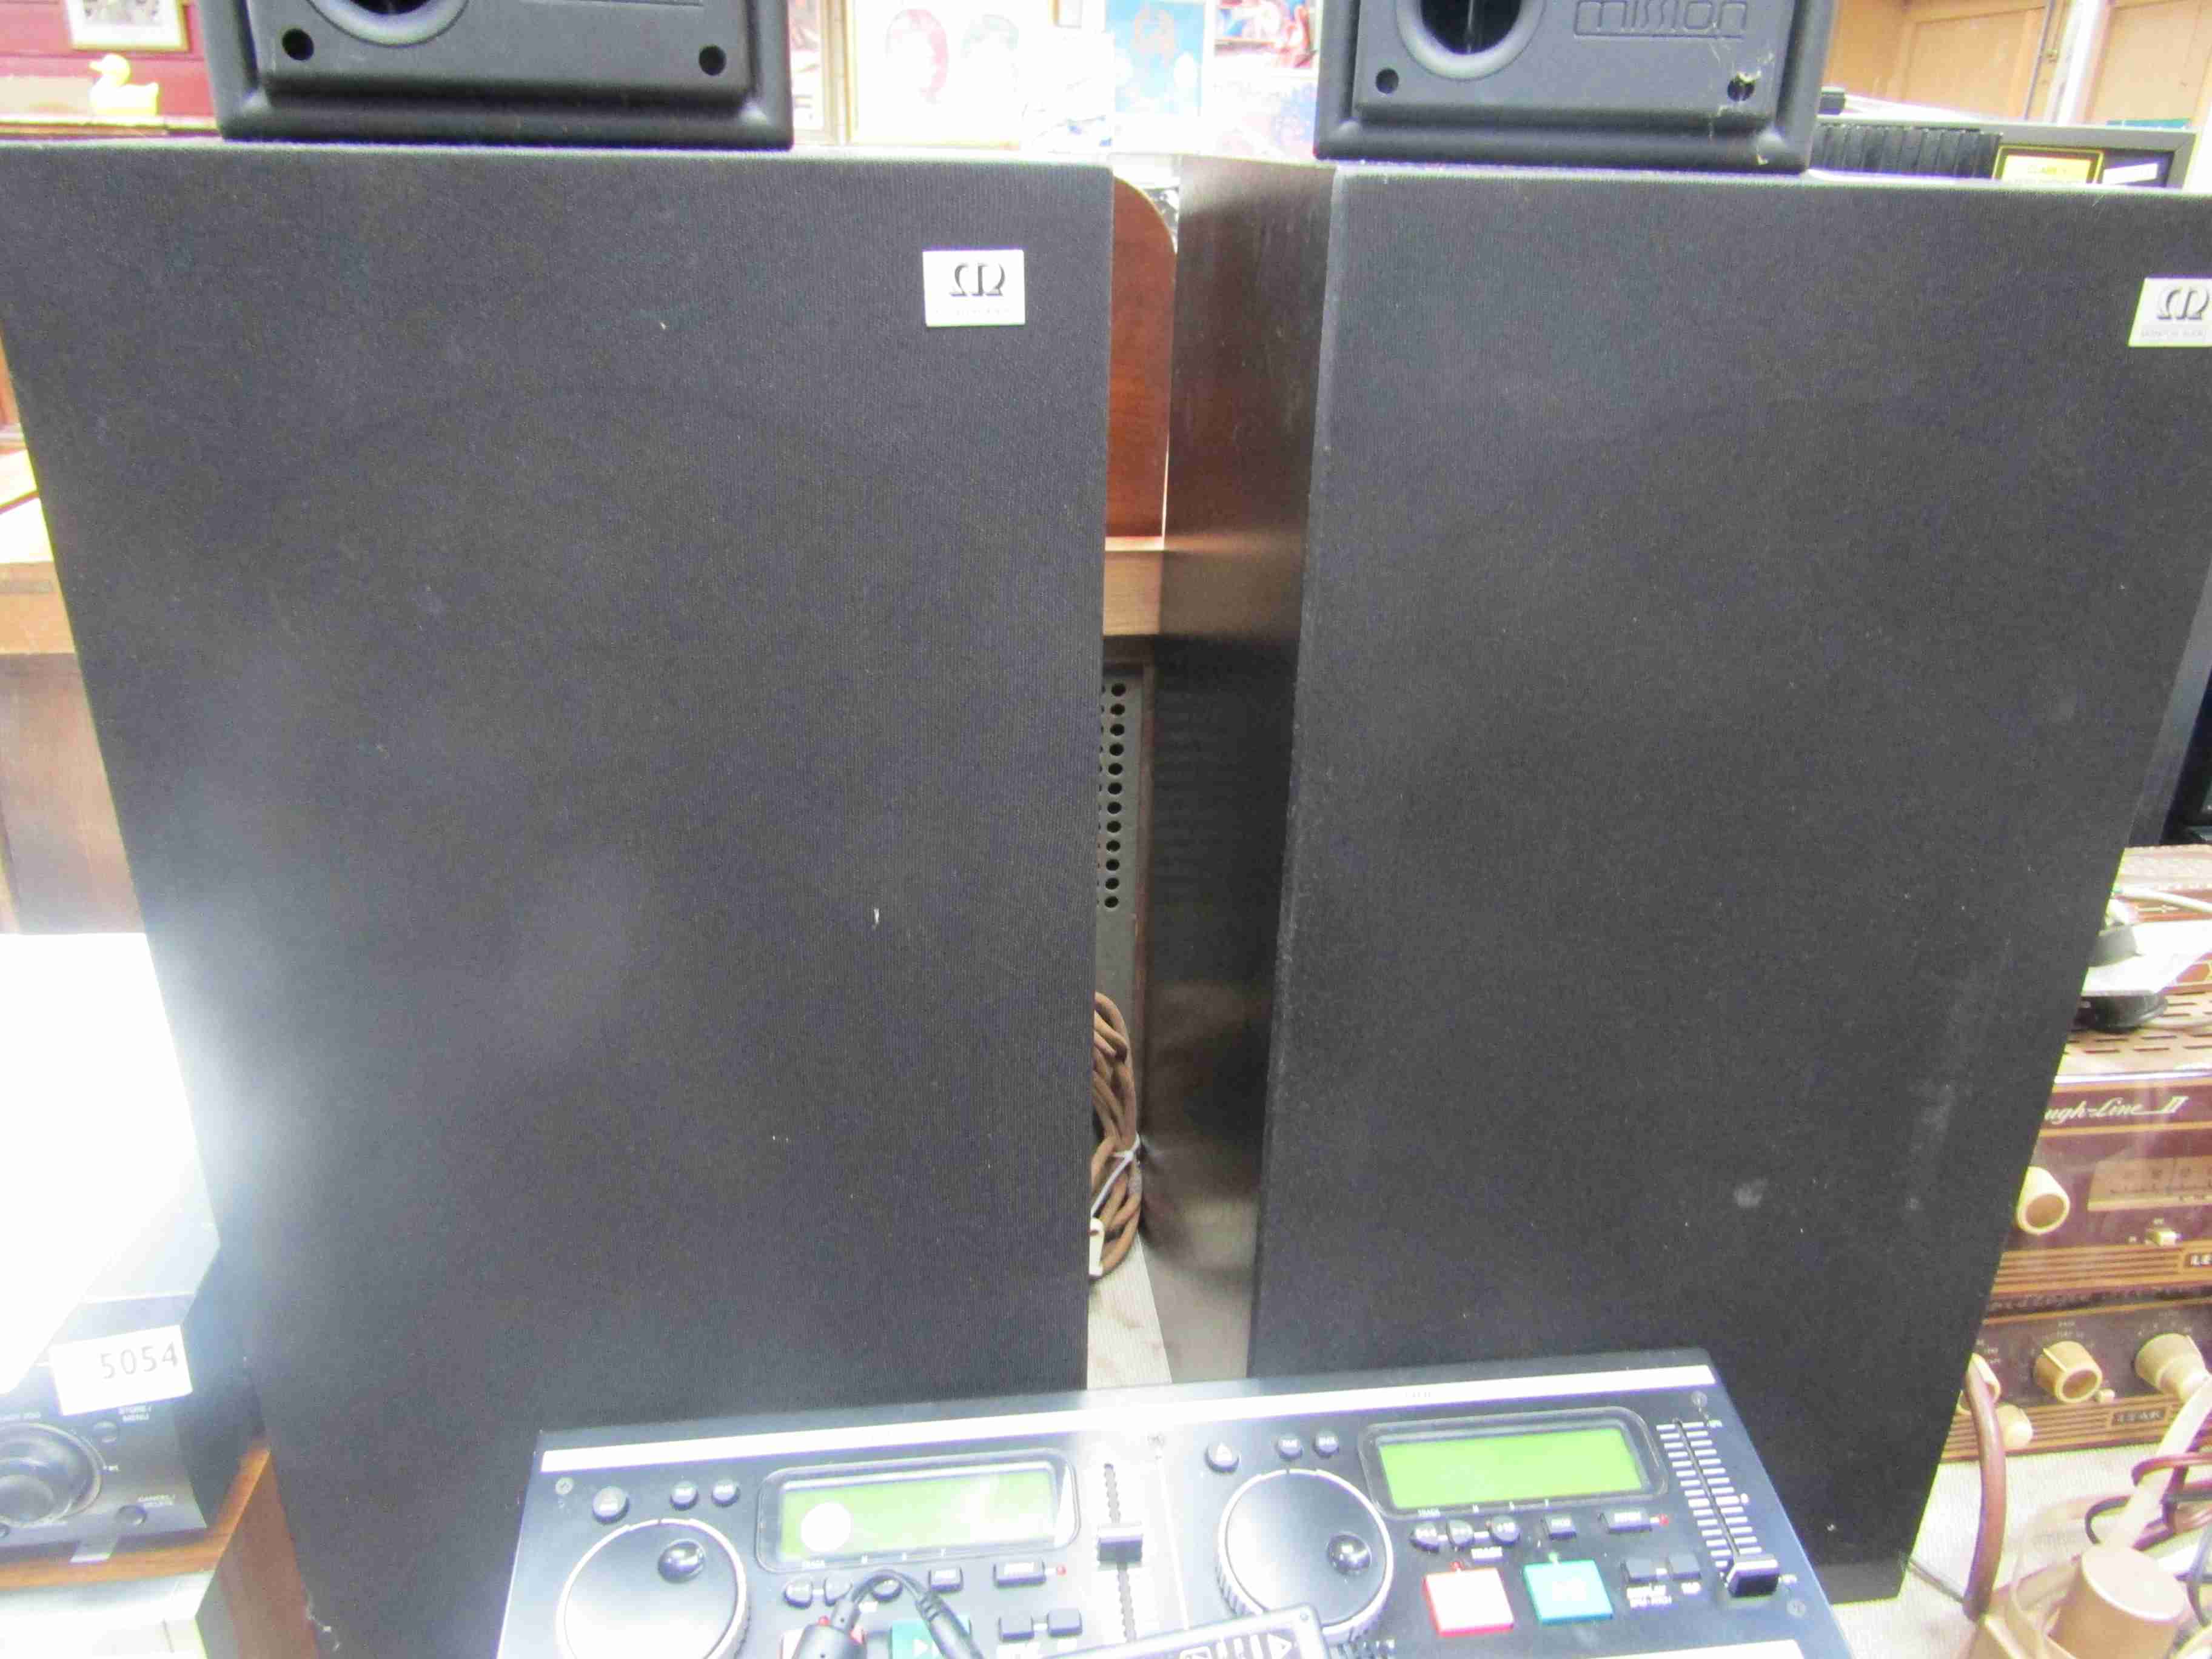 A pair of Monitor Audio MA6 speakers